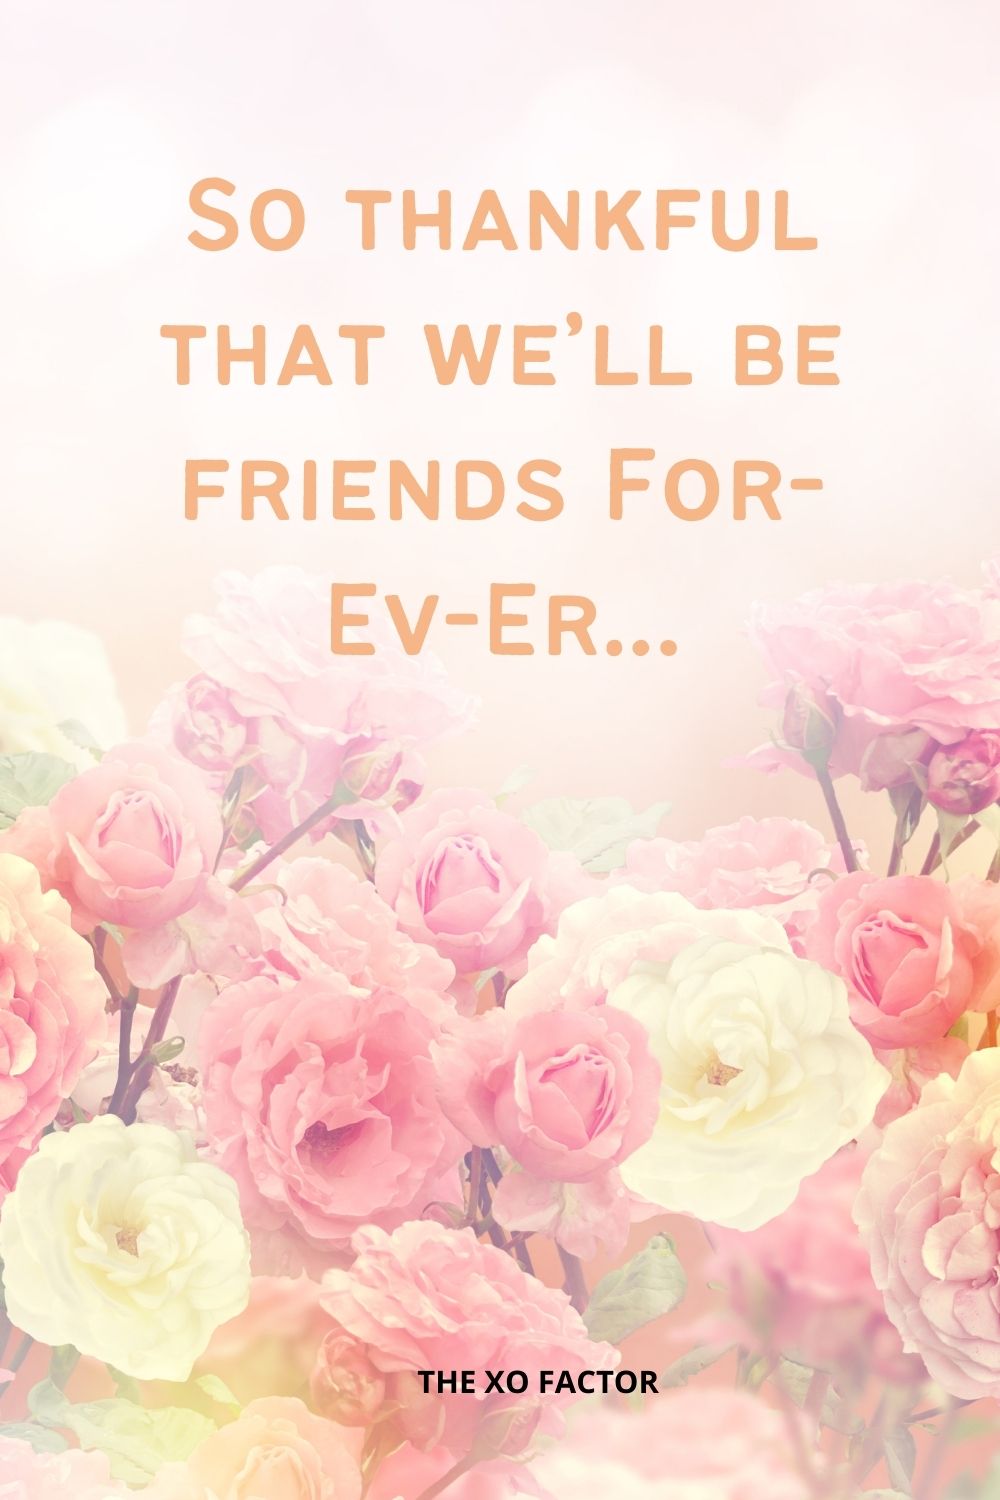 So thankful that we’ll be friends For-Ev-Er…